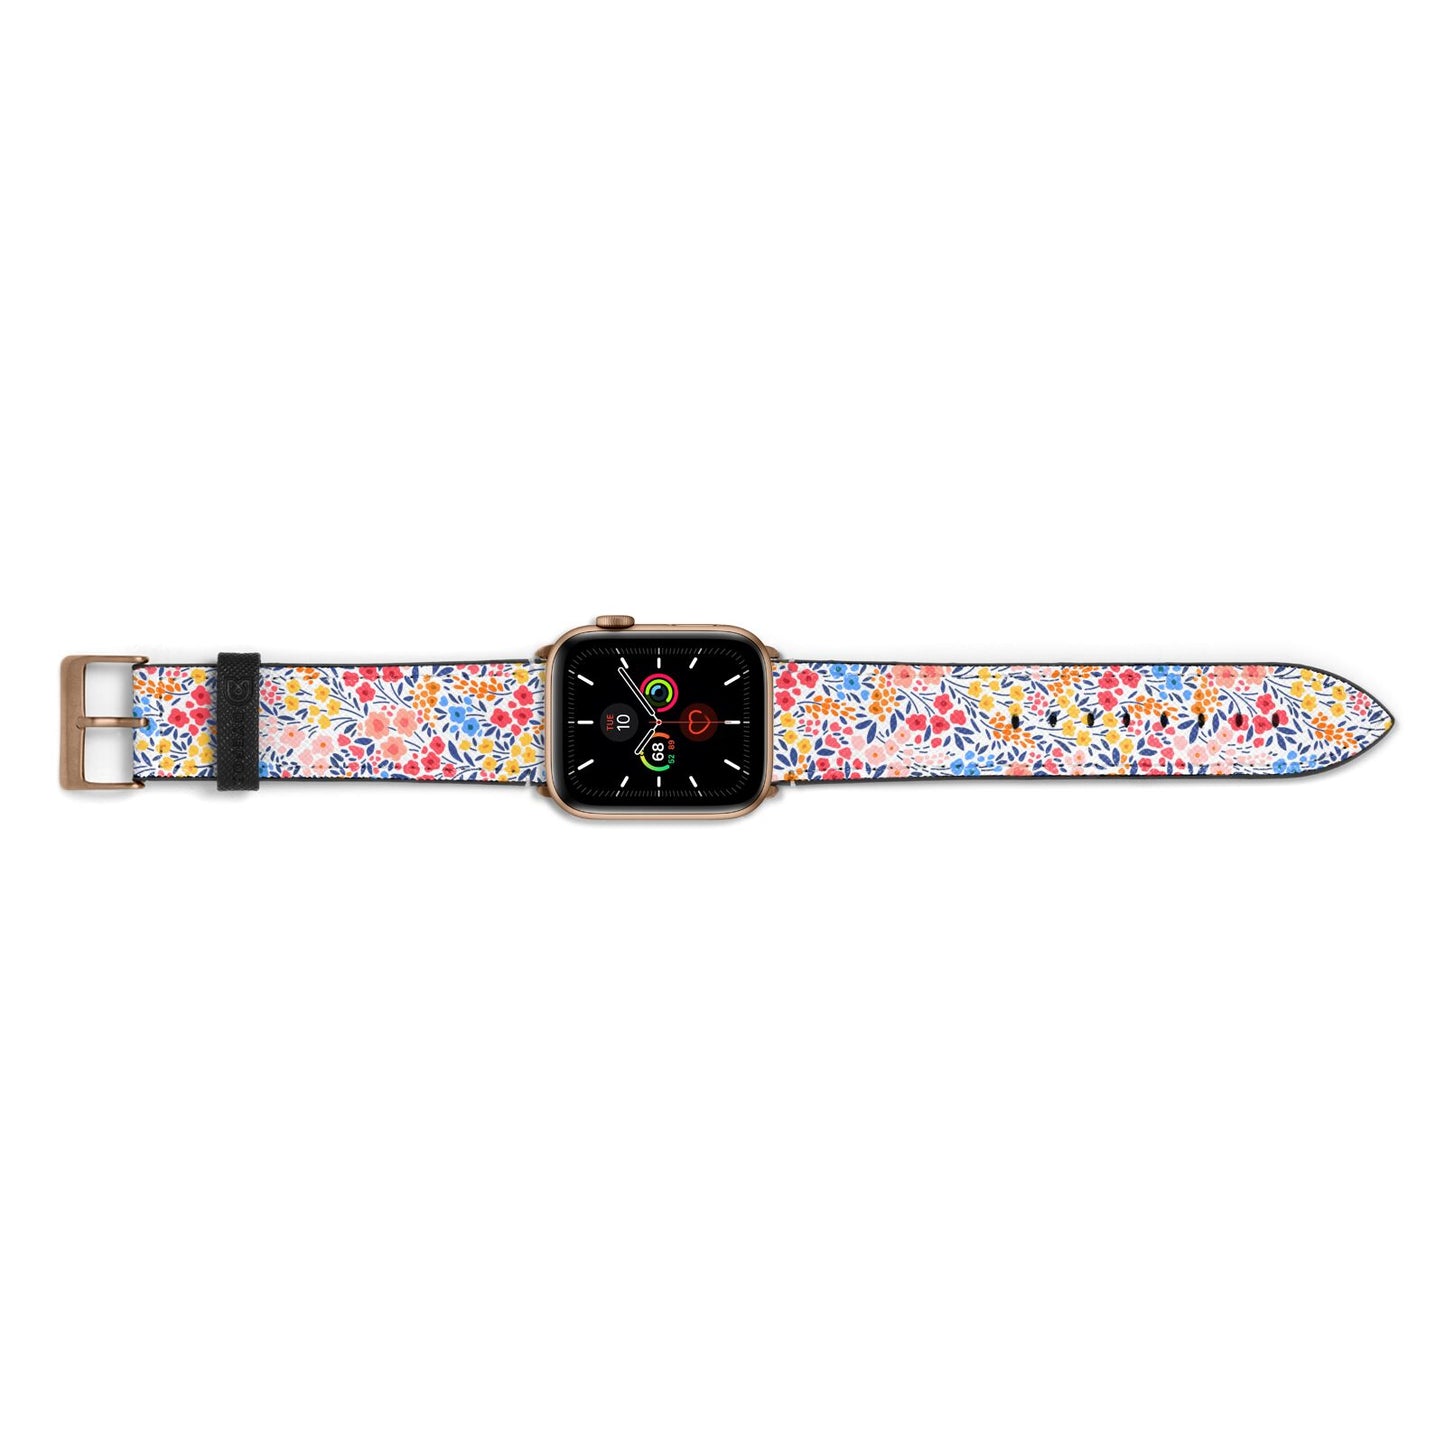 Small Flowers Apple Watch Strap Landscape Image Gold Hardware